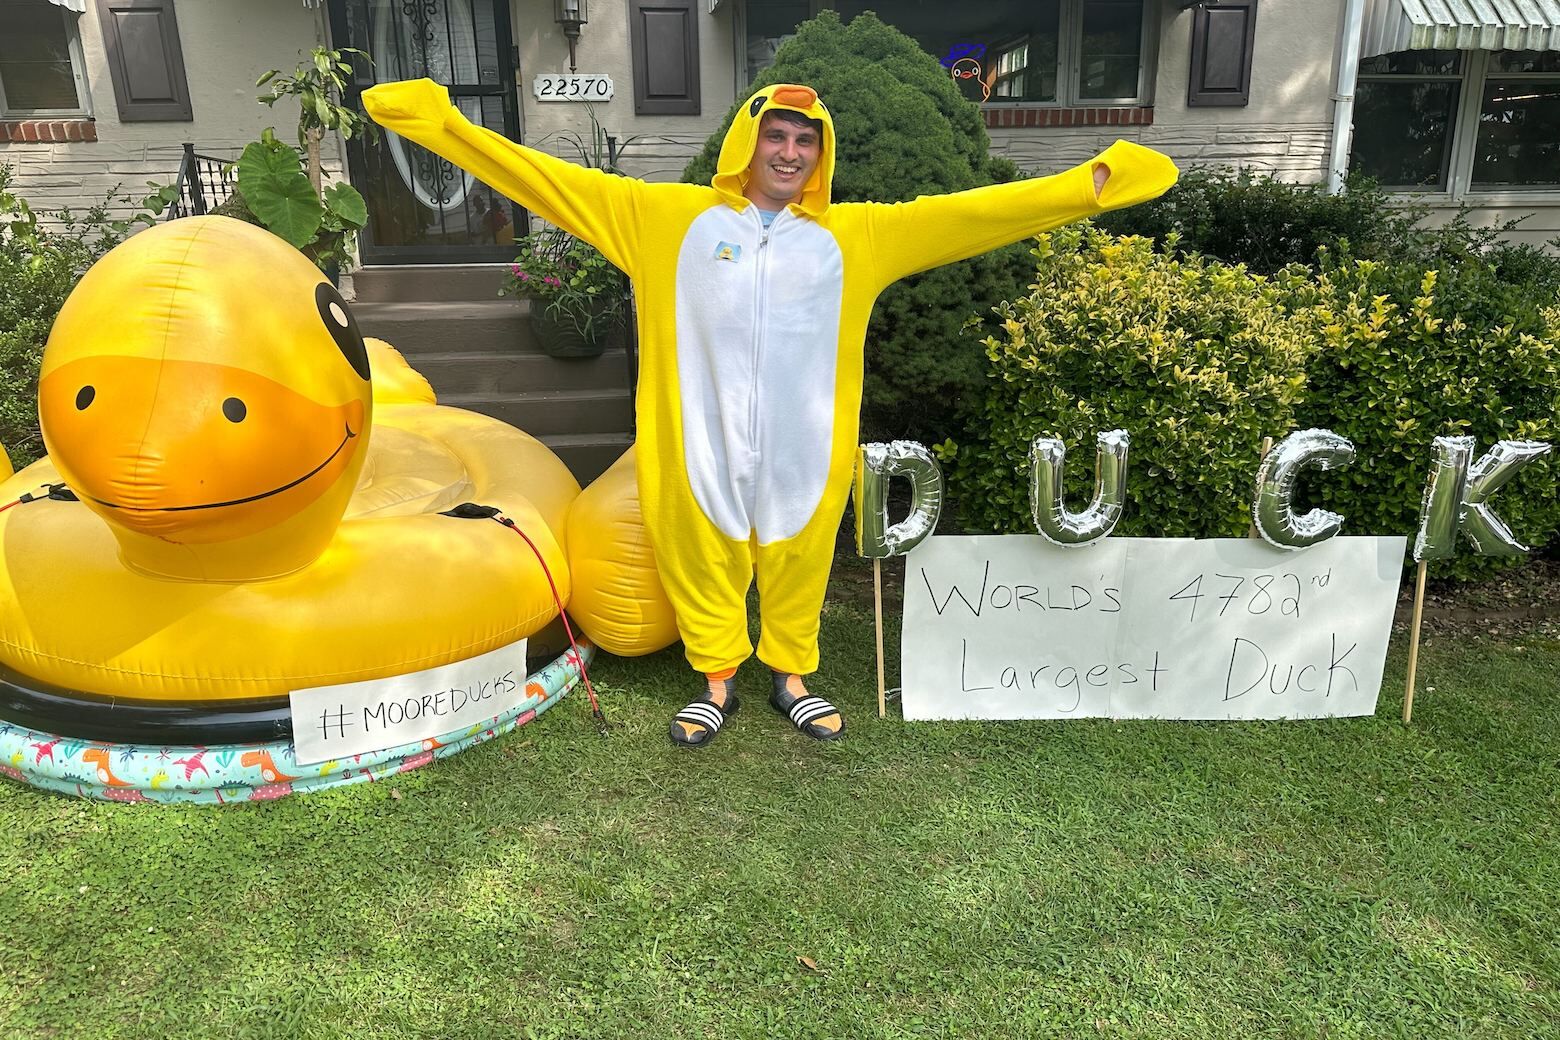 <div>
<p>&#8220;Make duck fest a thing!&#8221; exclaimed Gabrielle&#8217;s husband Daniel, wearing a full duck onesie.</p>
</div>
<p>&#8220;You are never too old to see a rubber duck and smile,&#8221; Jim added.</p>
